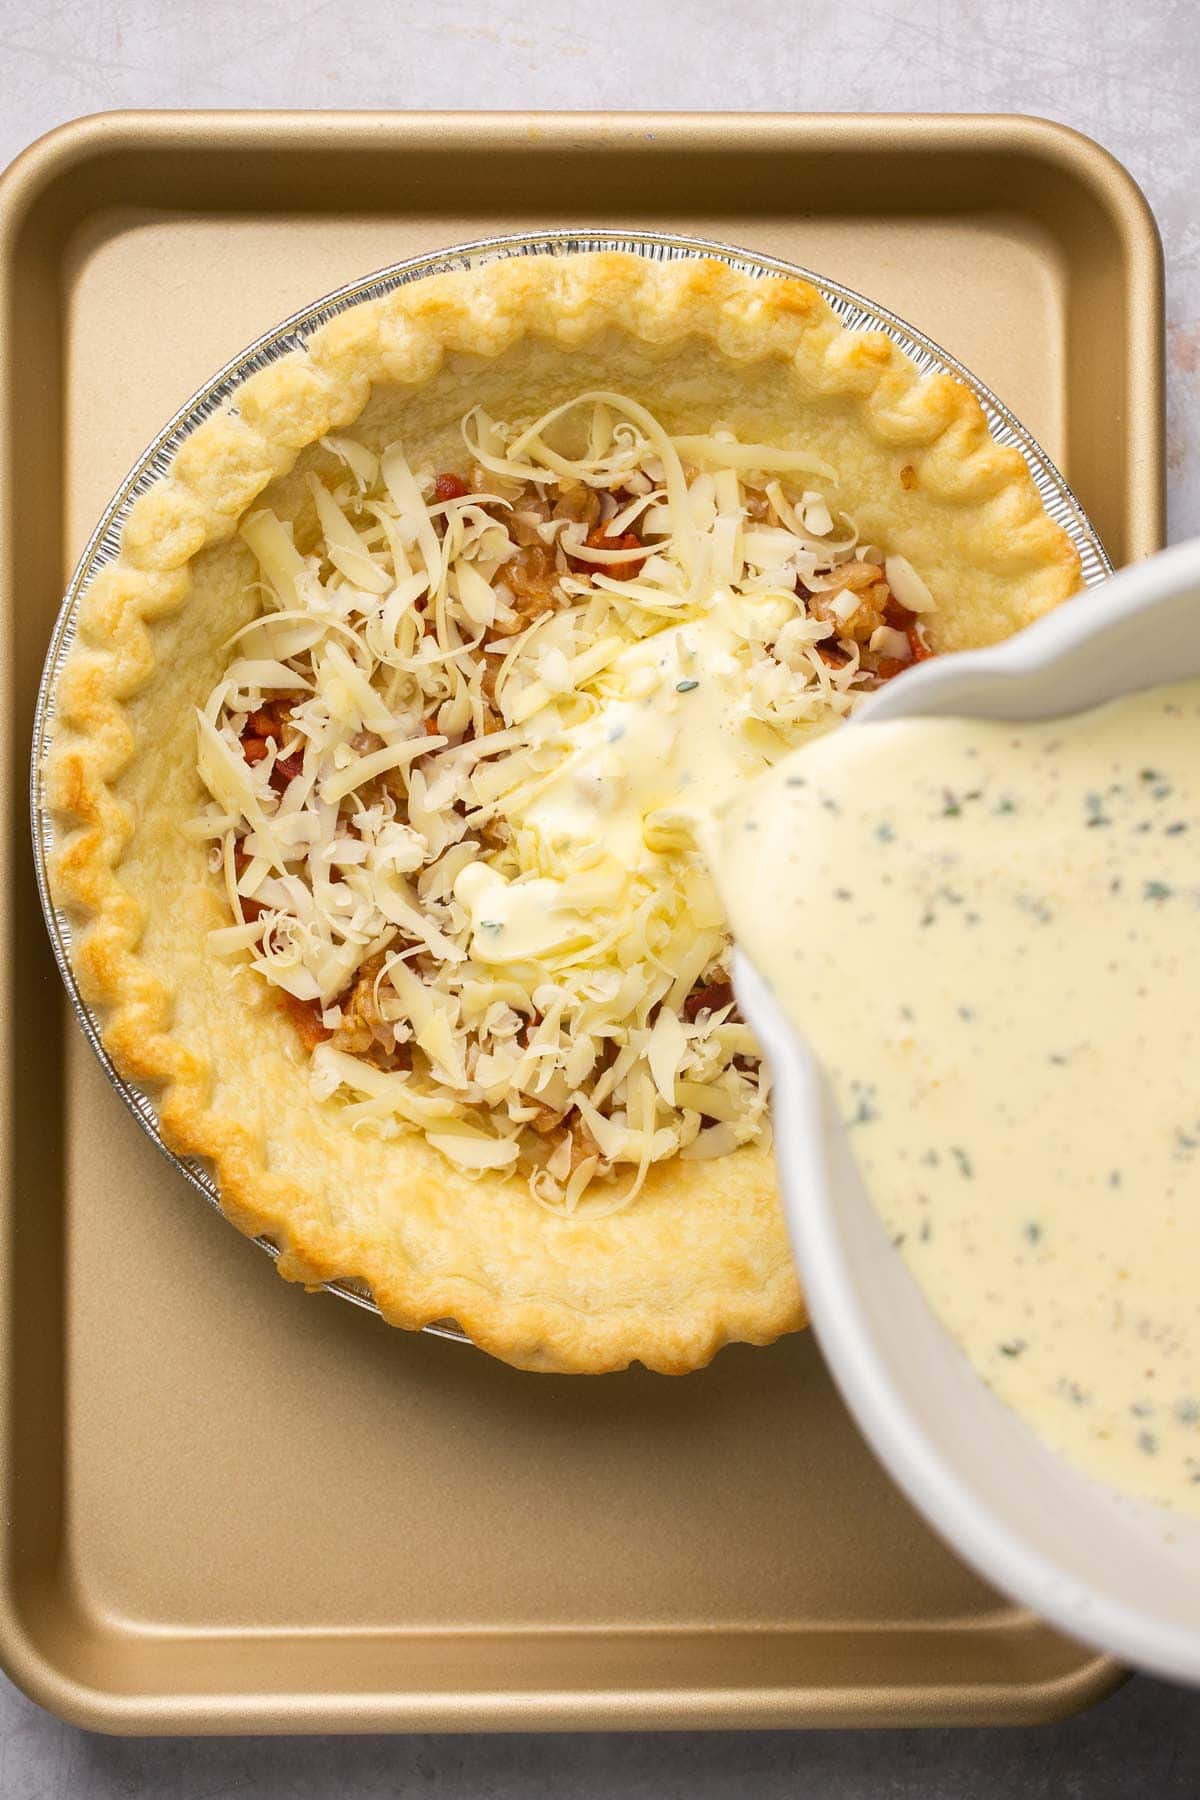 Pouring egg custard over bacon and cheese in a pie crust.